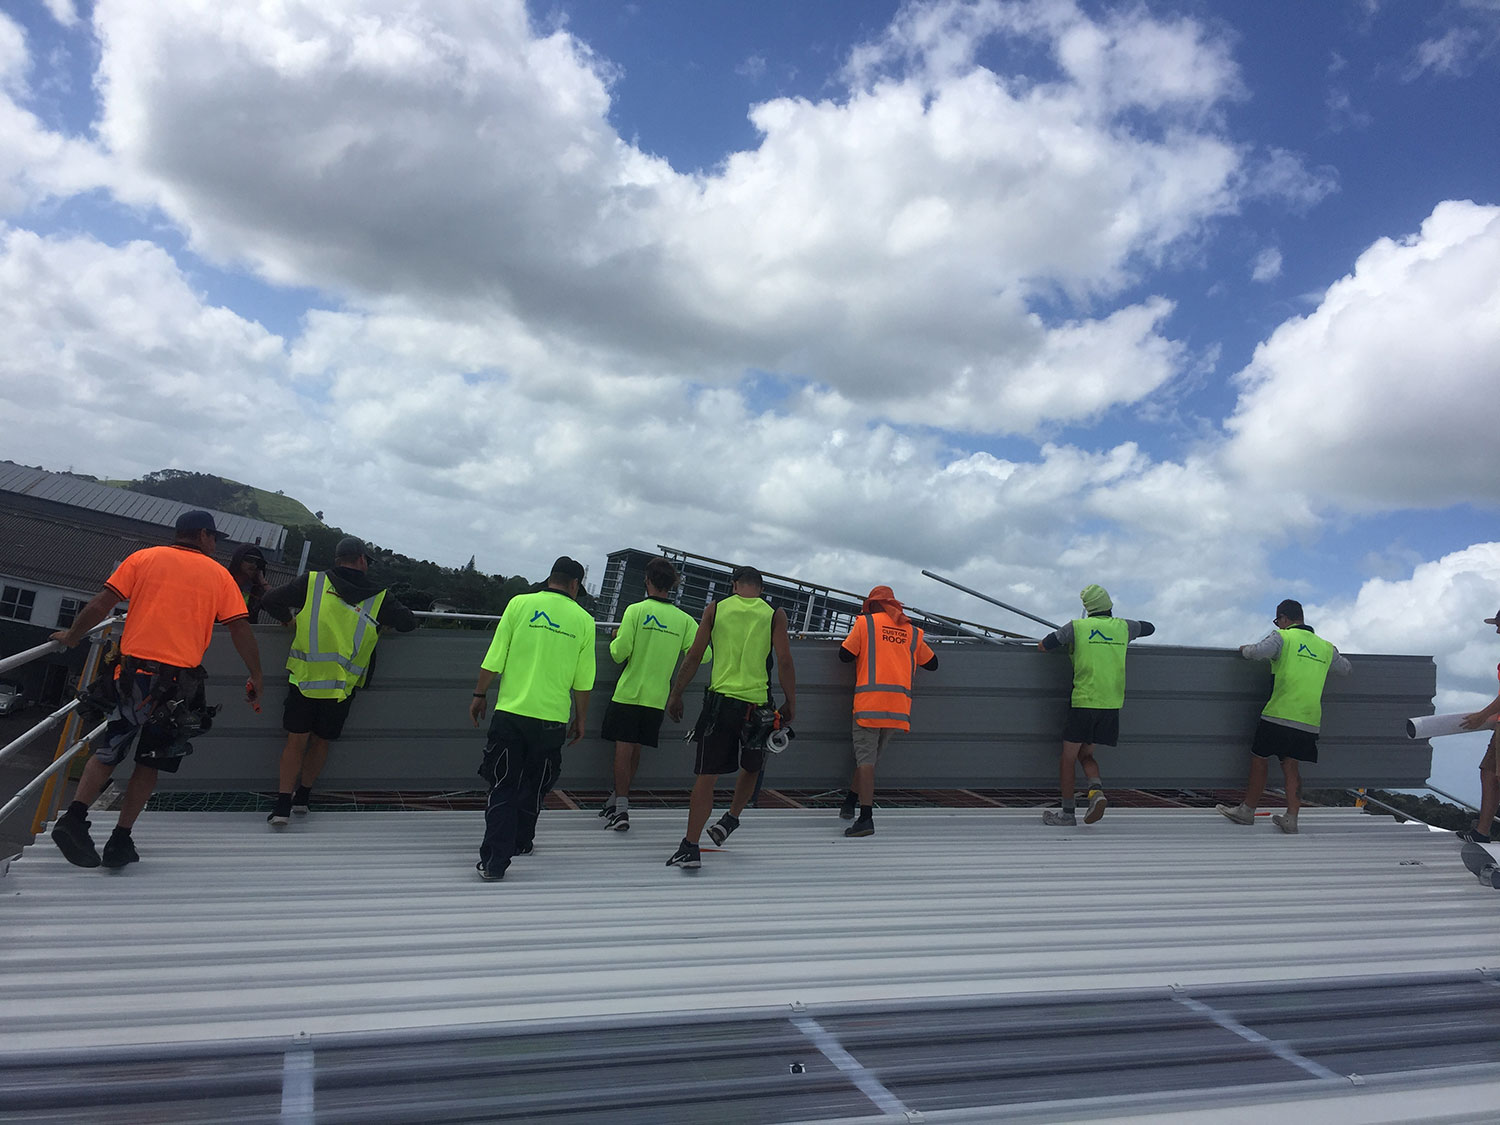 auckland roofing solutions services auckland and new zealand wide new roofs repair cladding and more Project gallery 42